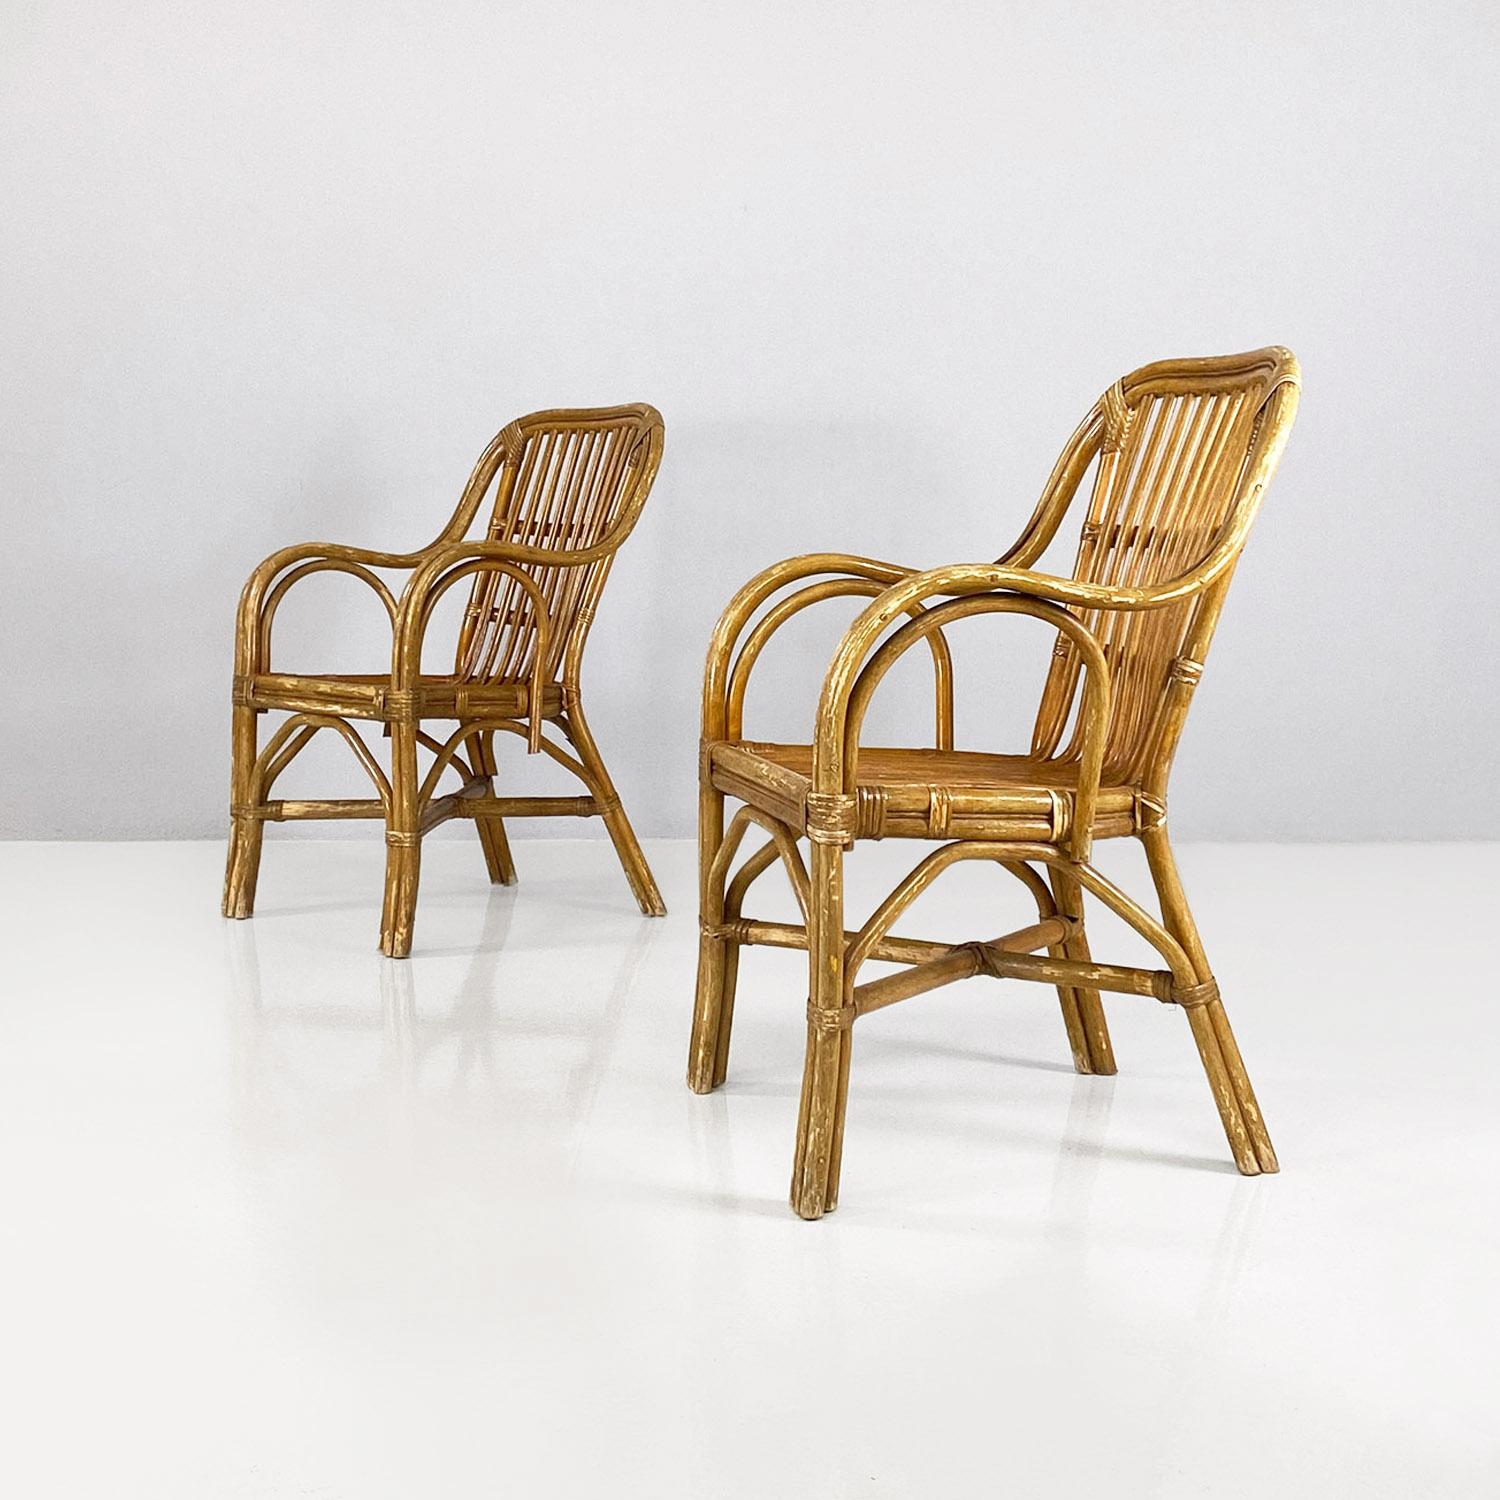 Italian mid-century modern rattan armchairs with curved armrests, 1960s For Sale 4